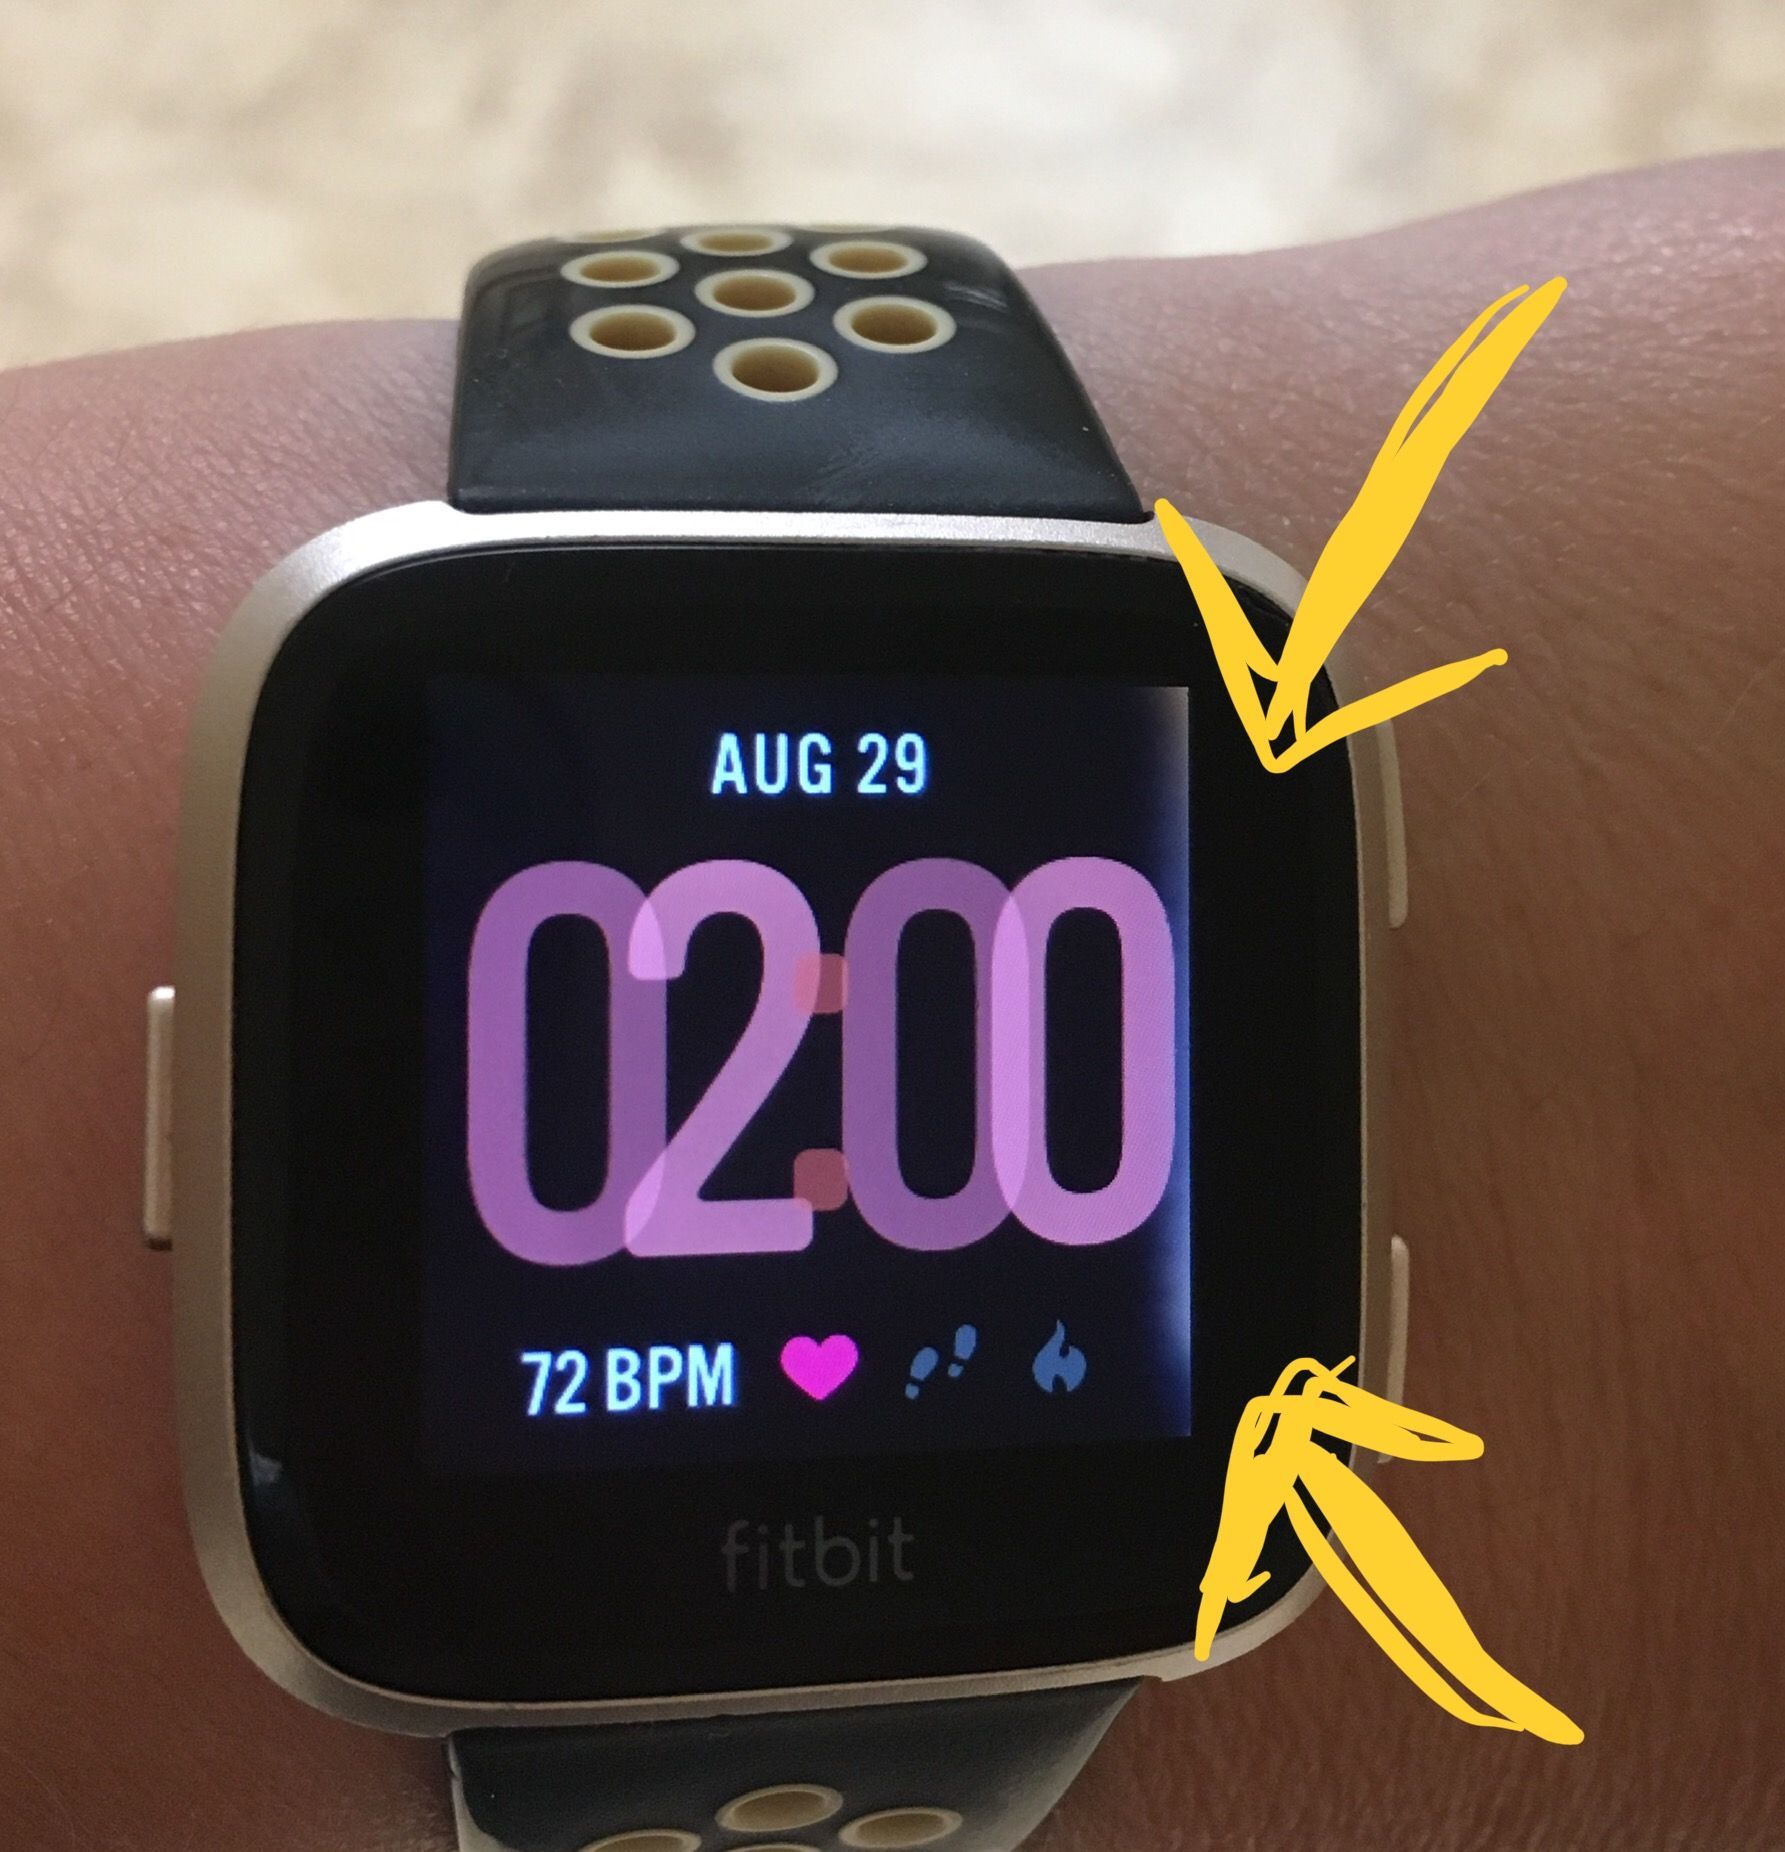 Re: Versa screen going out - Fitbit 